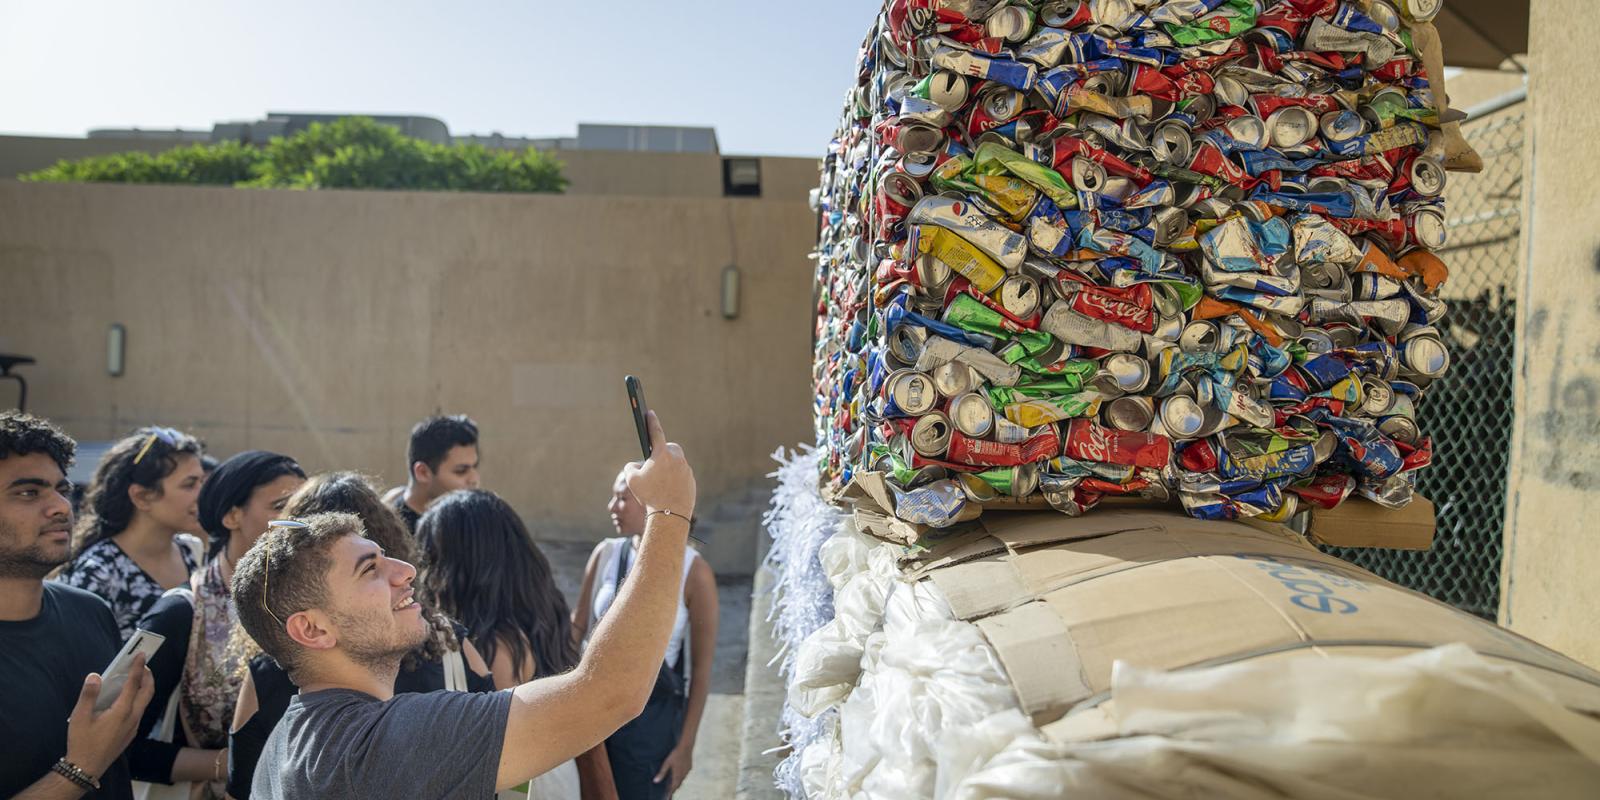 Male student taking a photo of recycled cans